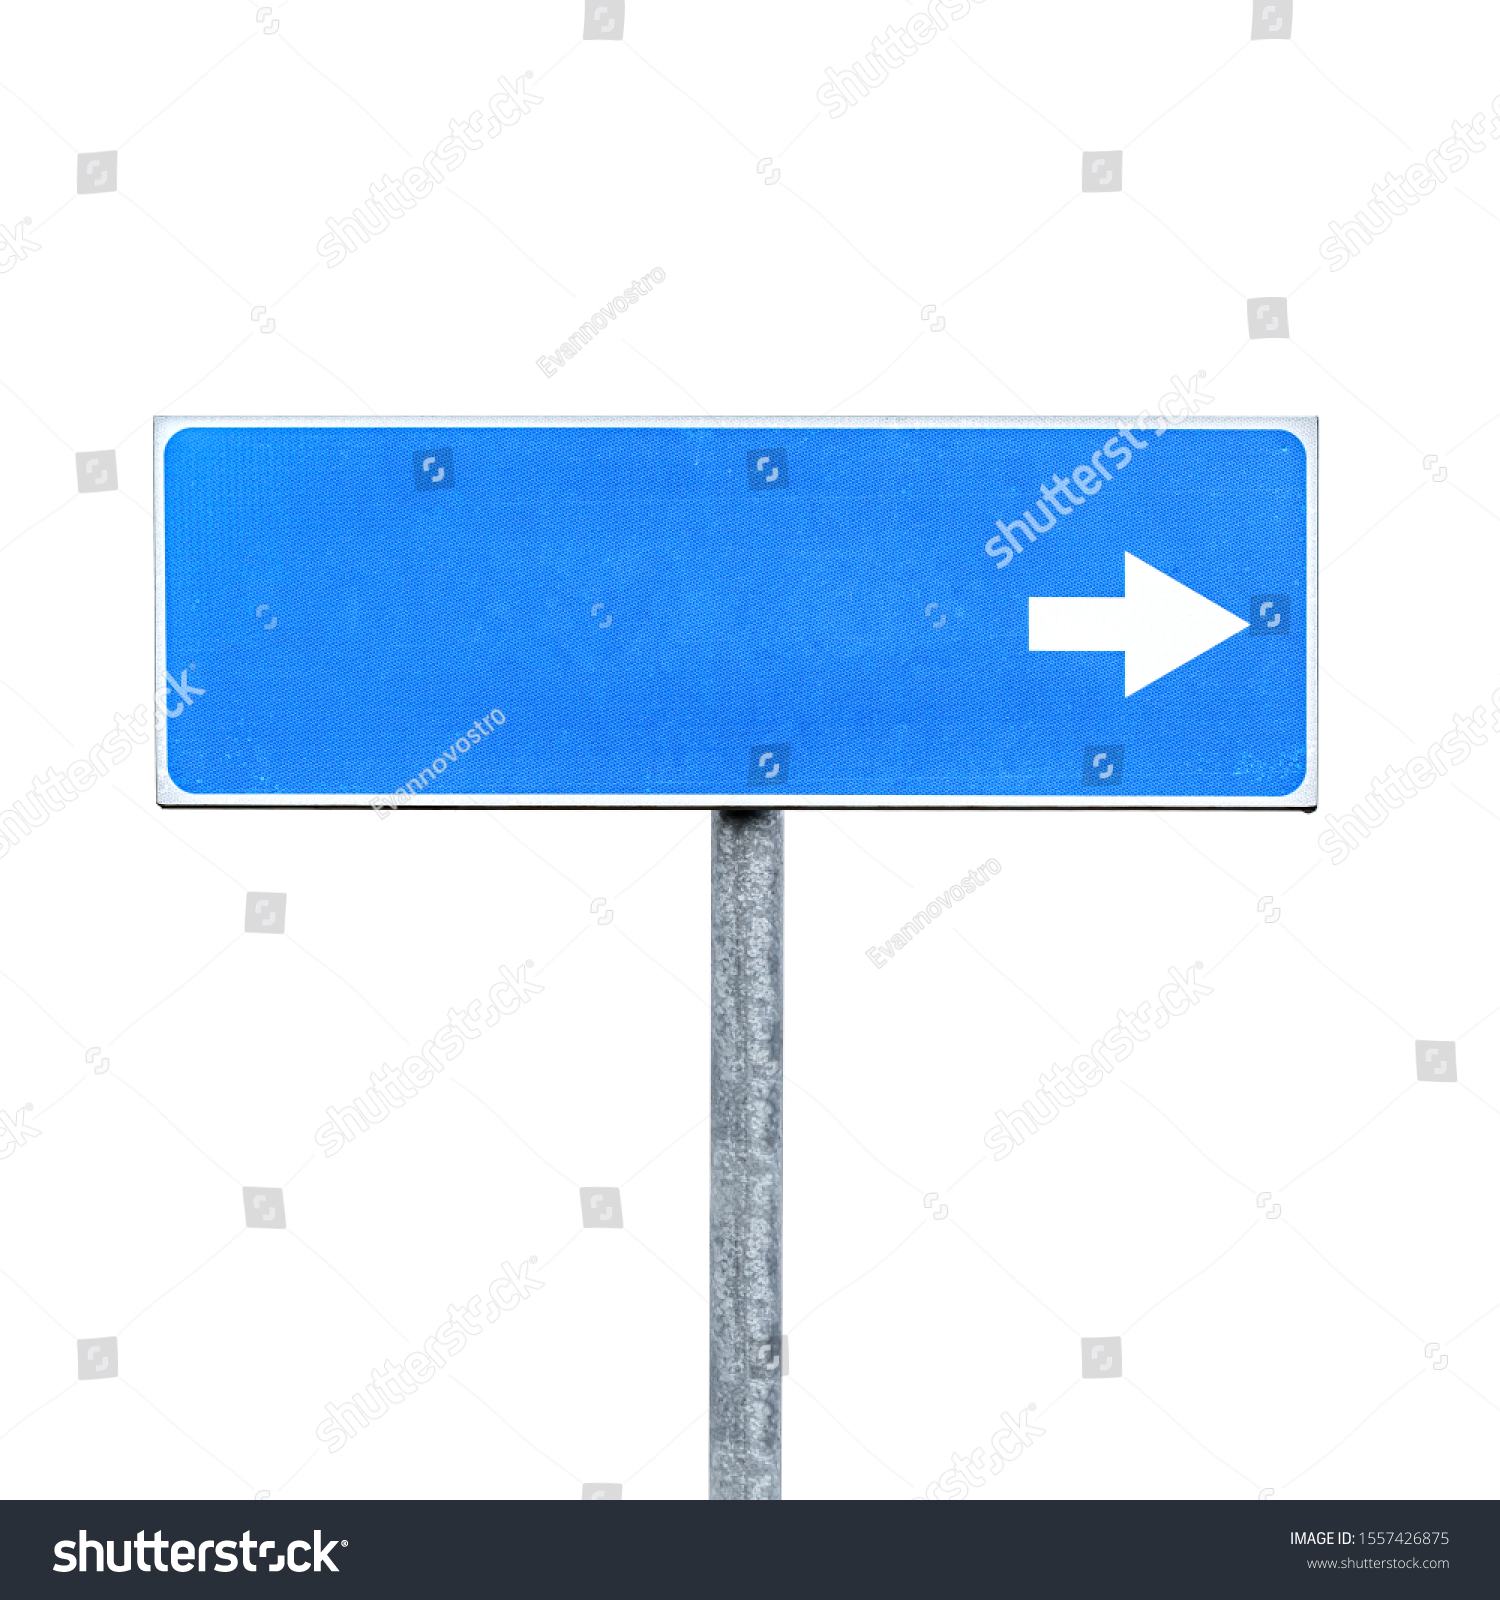 New blank blue road sign with an empty place for destination name and direction arrow isolated on white background #1557426875